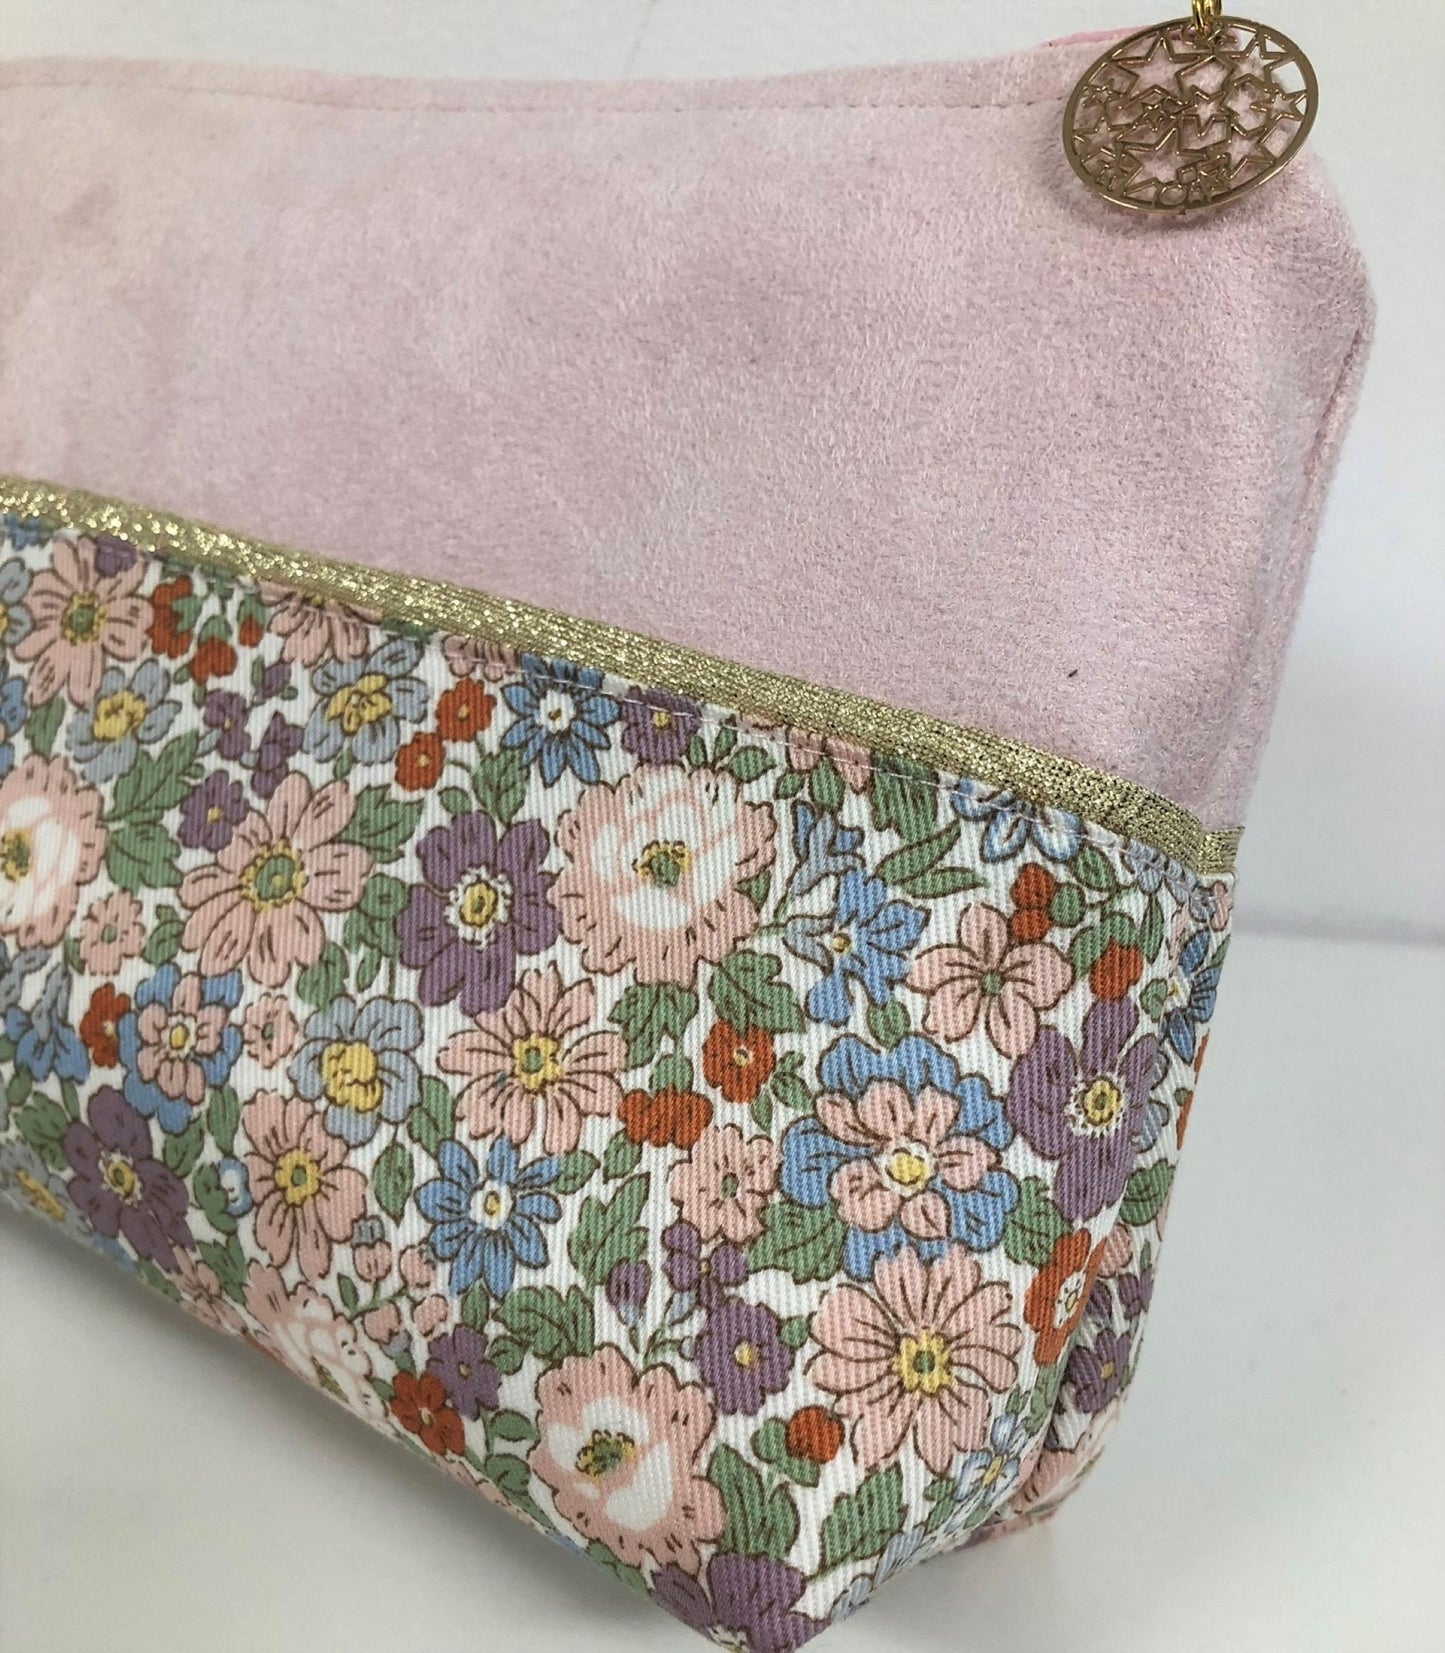 Pink and gold pastel floral makeup pouch